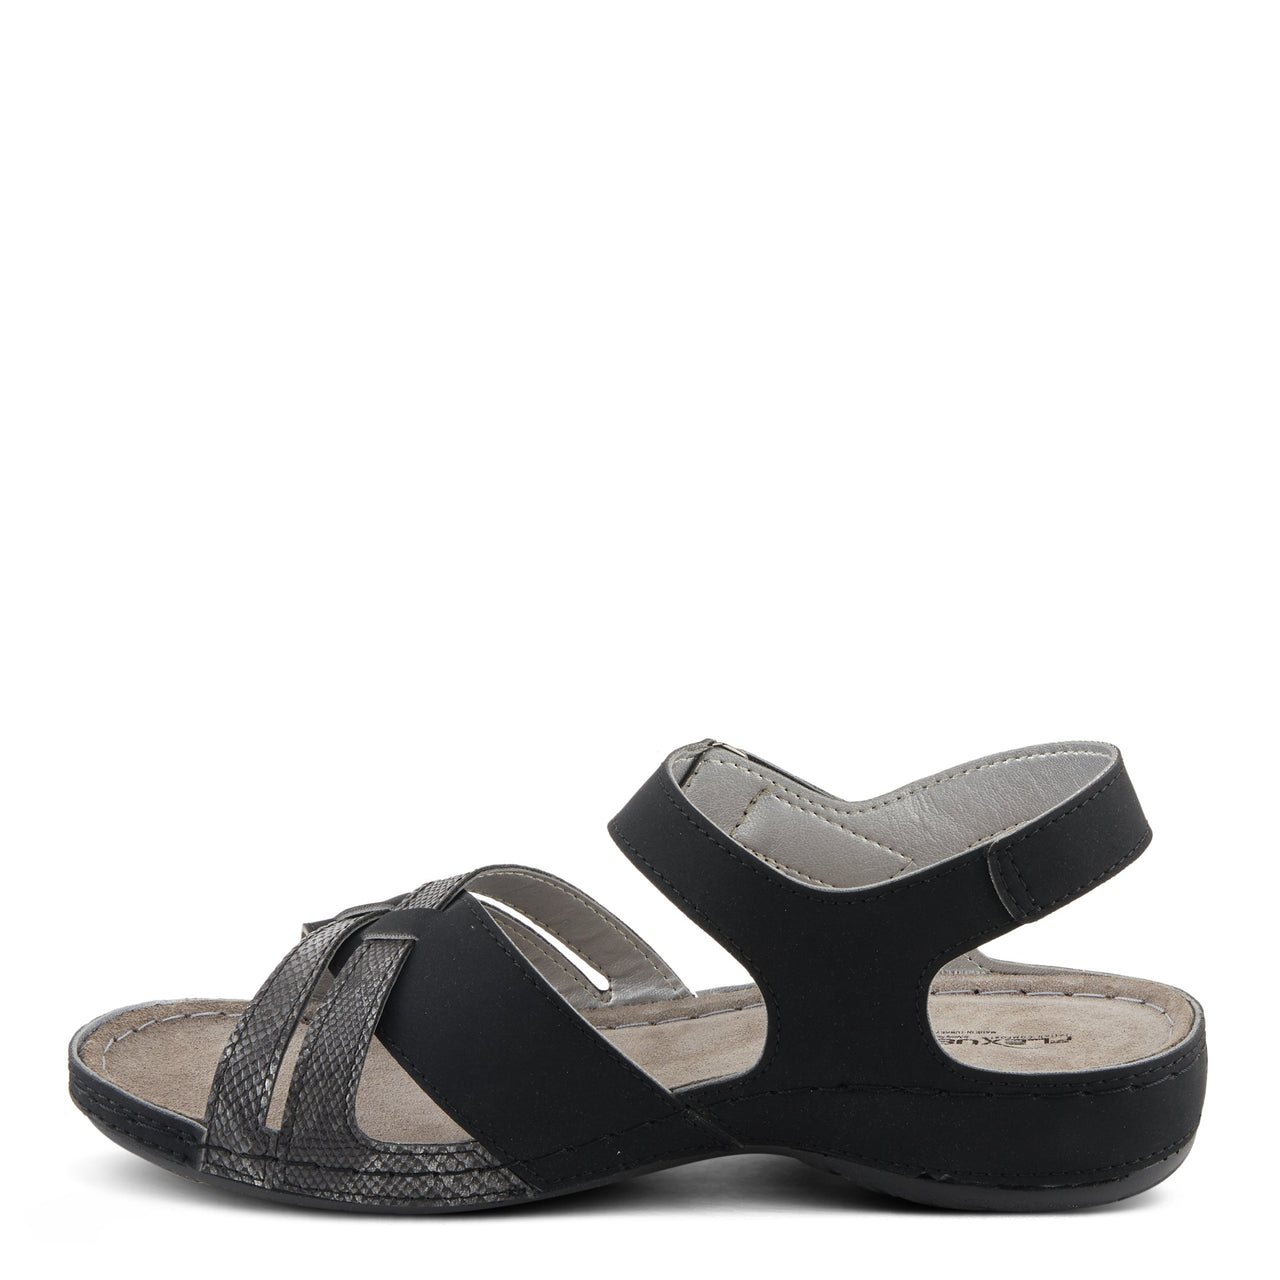 Spring Step Shoes Flexus Alvina Sandals - Front View with slip-on design